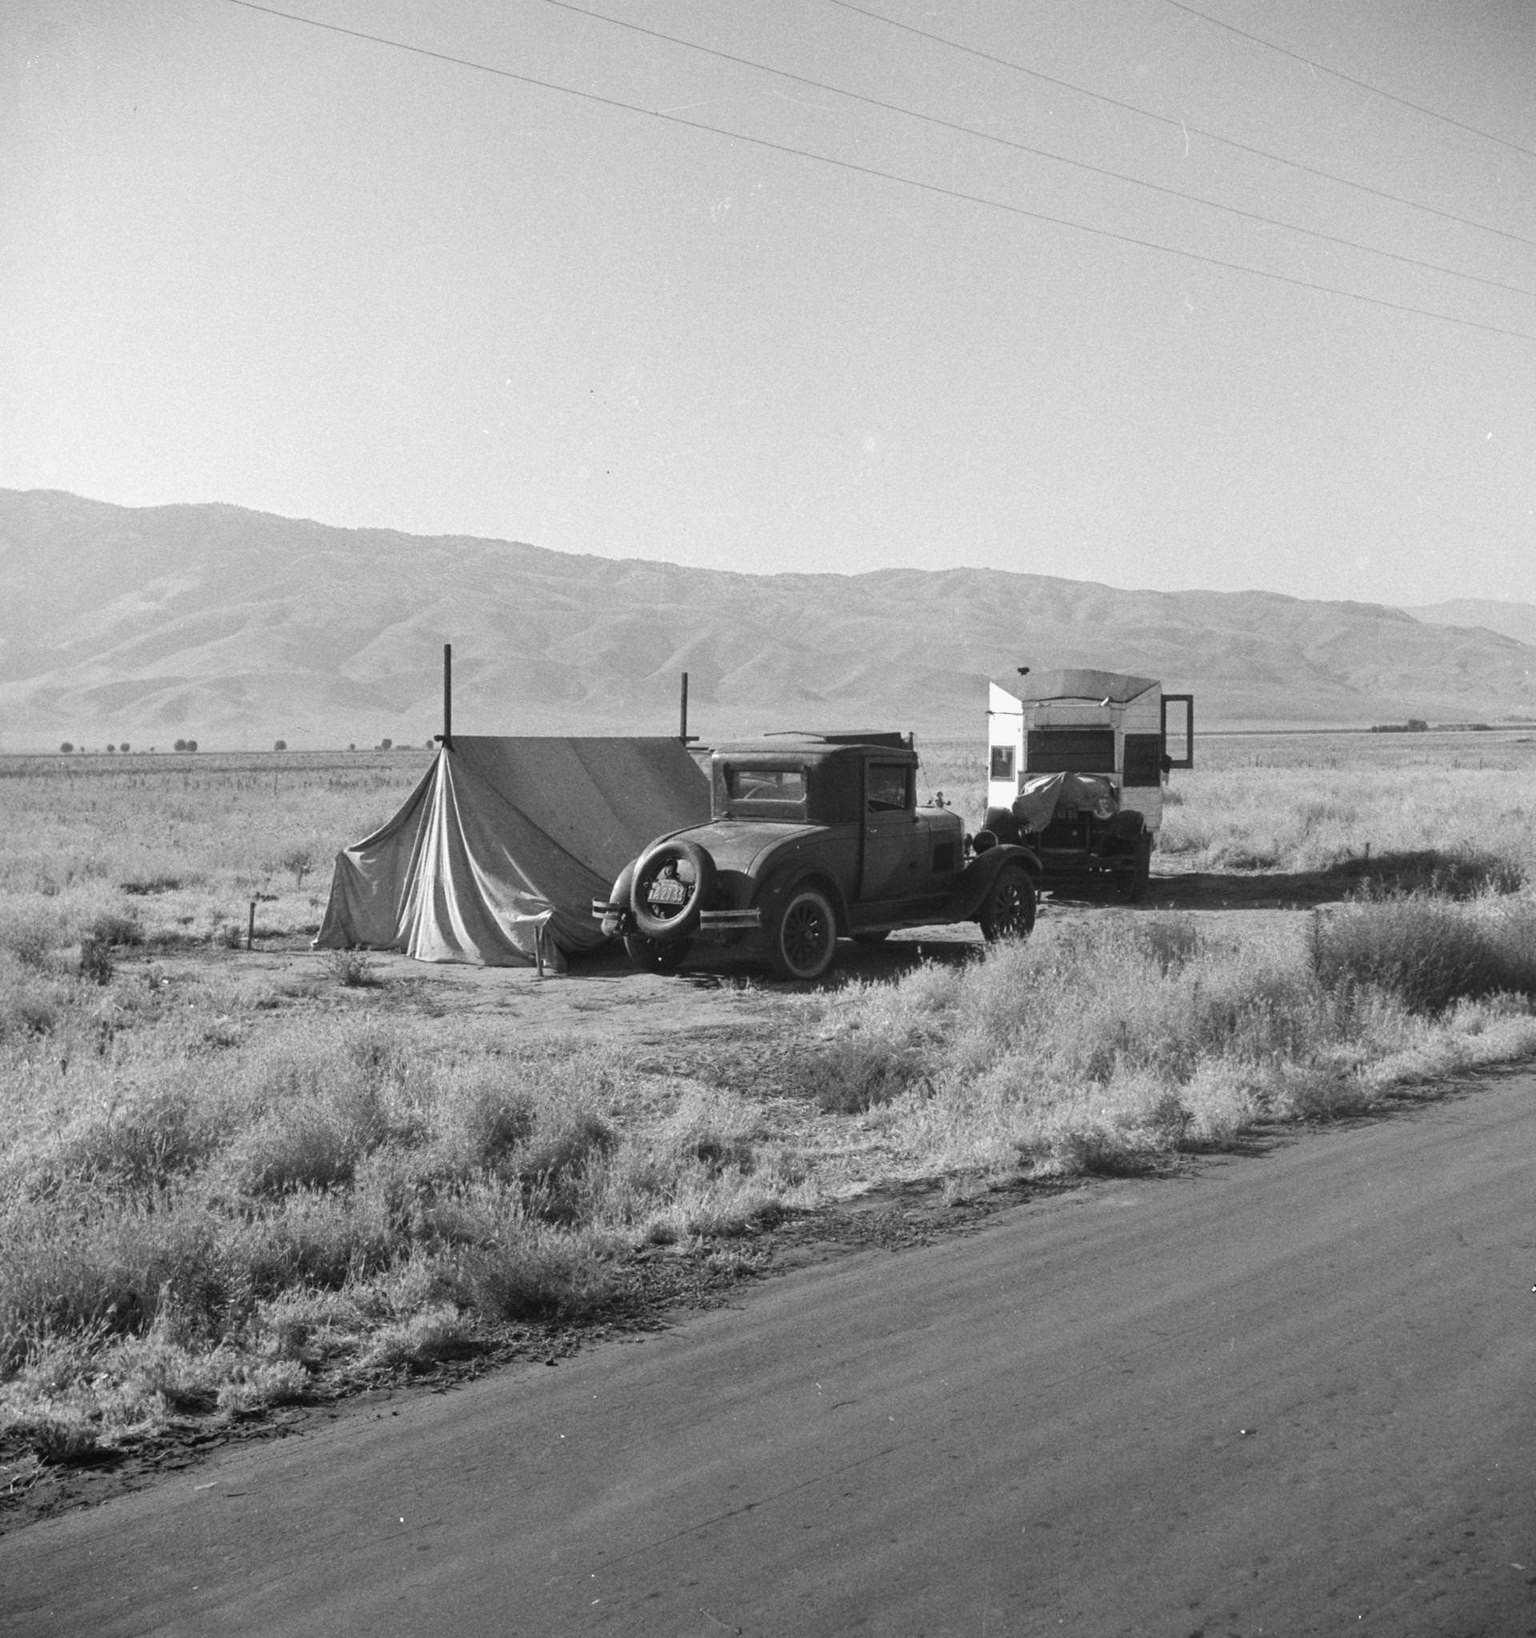 Transient potato workers camping along the highway. Near Shafter, 1930s